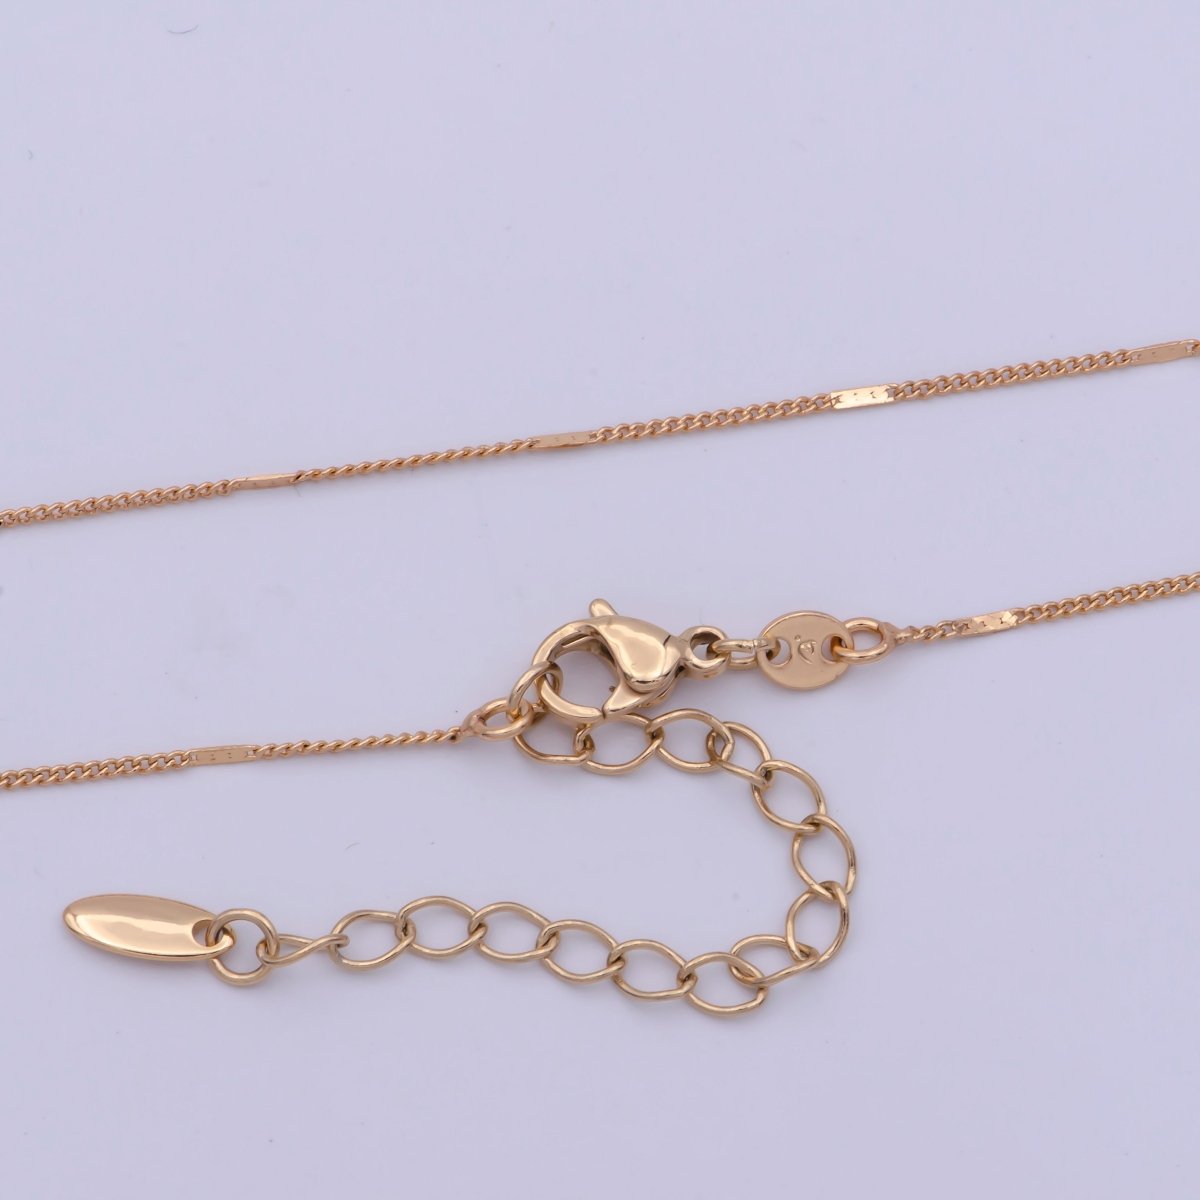 18k Gold Filled Curb Necklace Dainty Curb Necklace 18 inch + 2 inch Extender long Ready to Wear Chain | WA-475 Clearance Pricing - DLUXCA